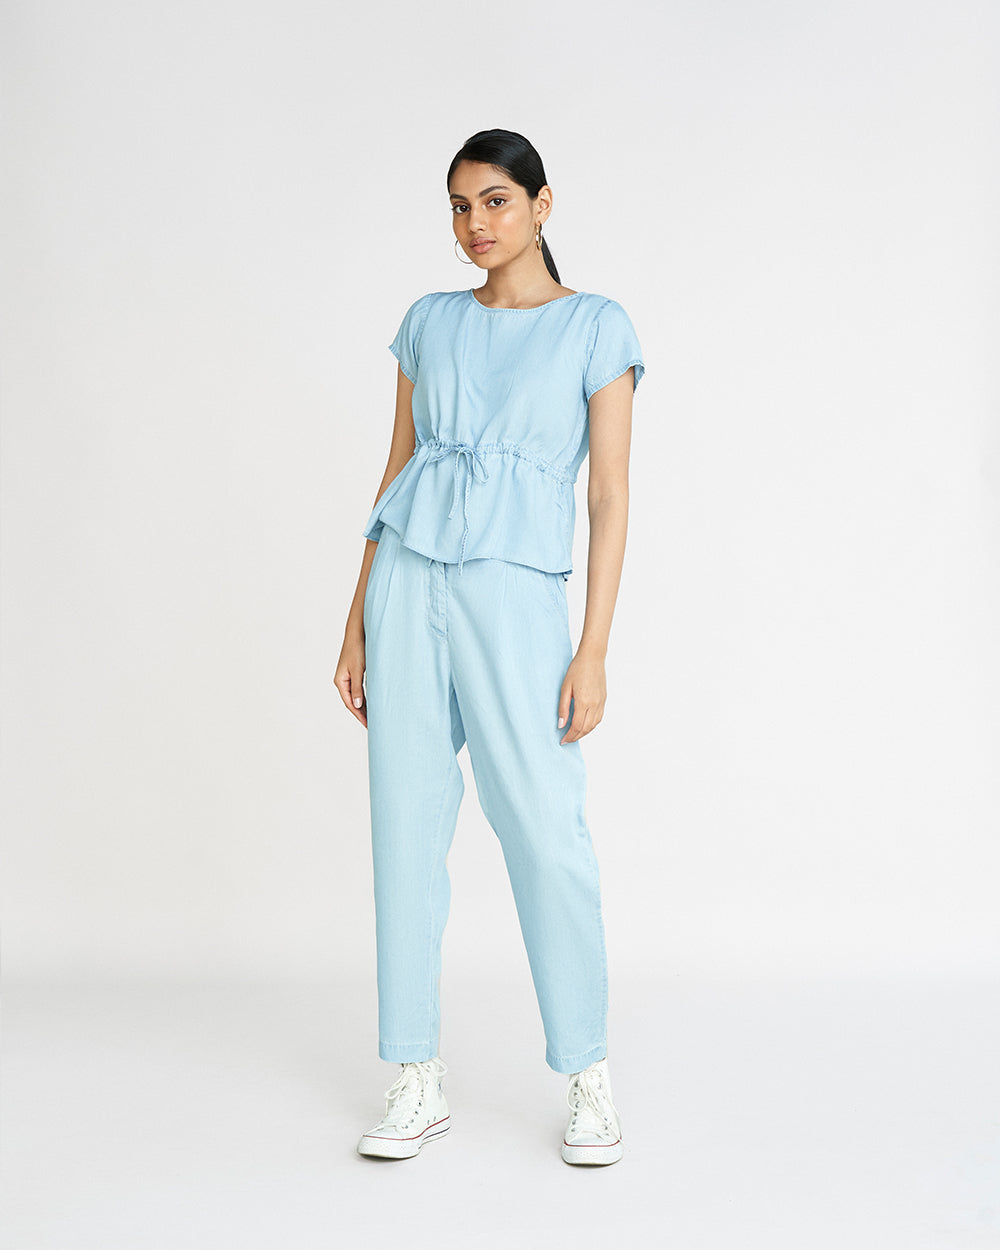 Blue Tunic Top at Kamakhyaa by Reistor. This item is Blue, Casual Wear, Denim, Less than $50, Natural, Relaxed Fit, Solids, Tencel, Tops, Tunic Tops, Womenswear